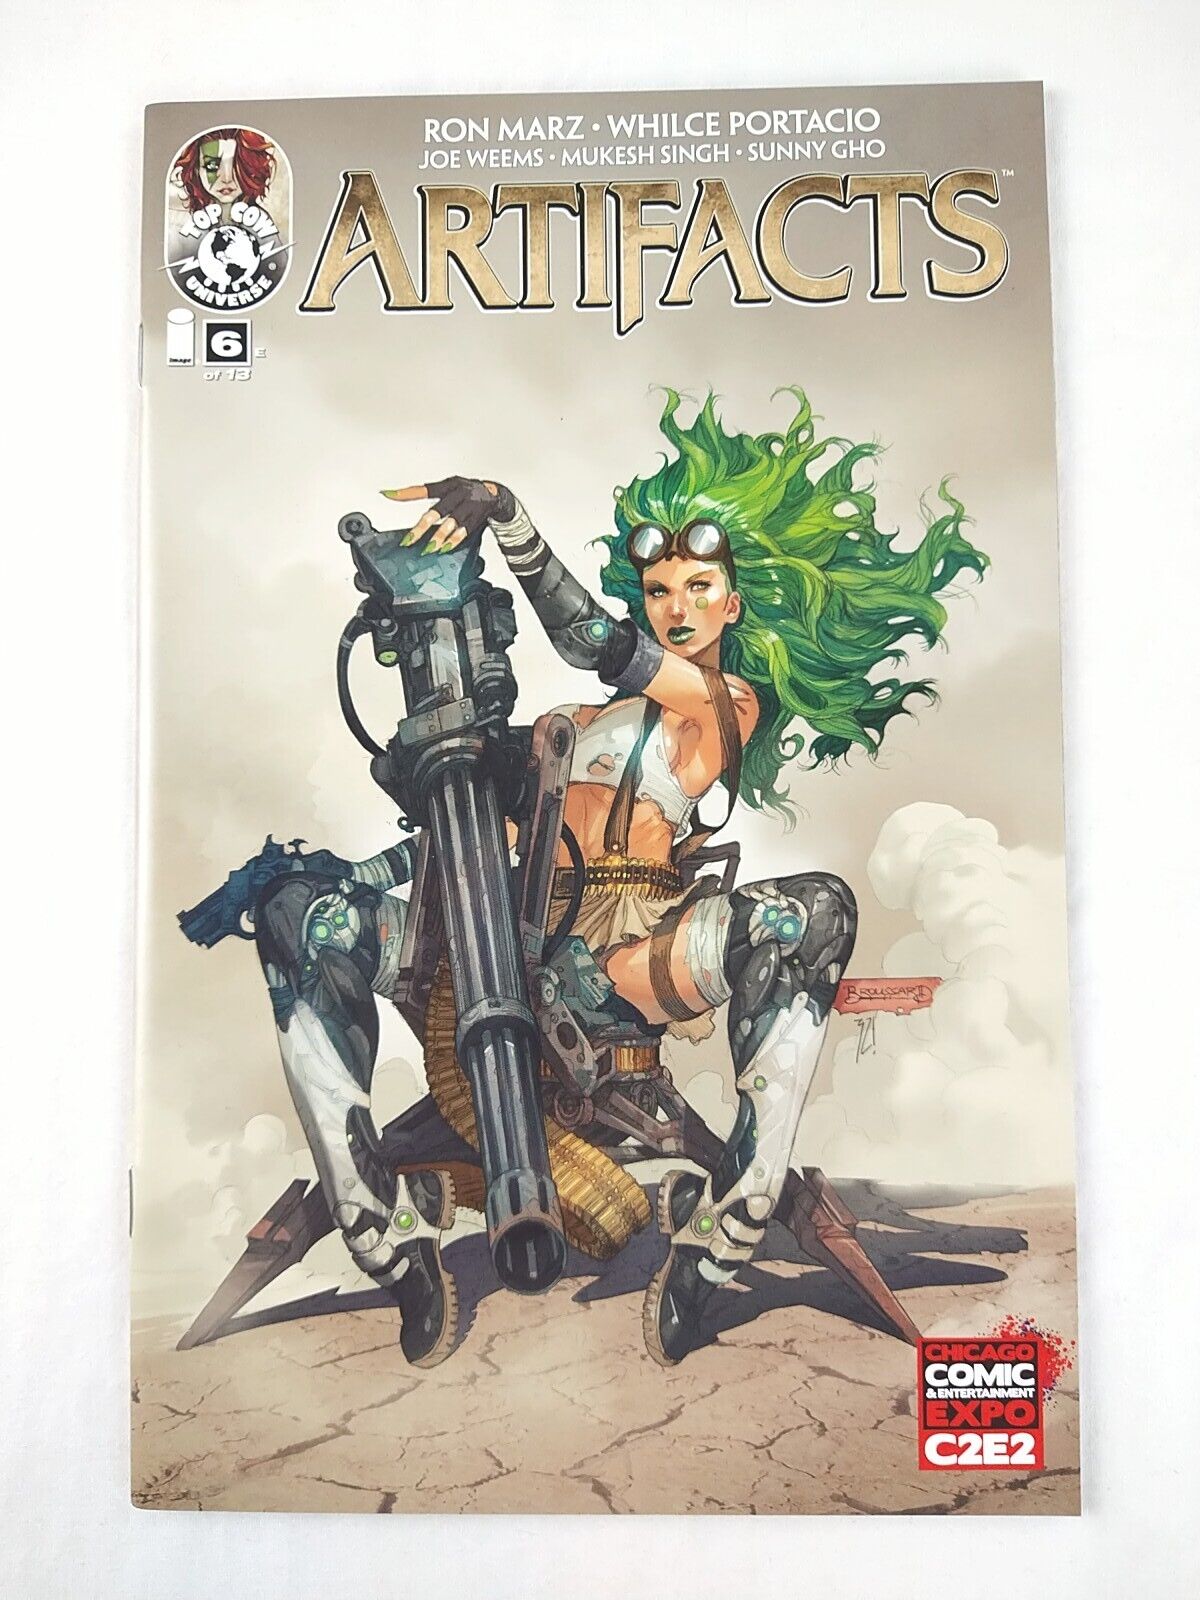 Artifacts #1 Super Rare Chicago Expo C2E2 Broussard Variant (2011 Top Cow) Comic